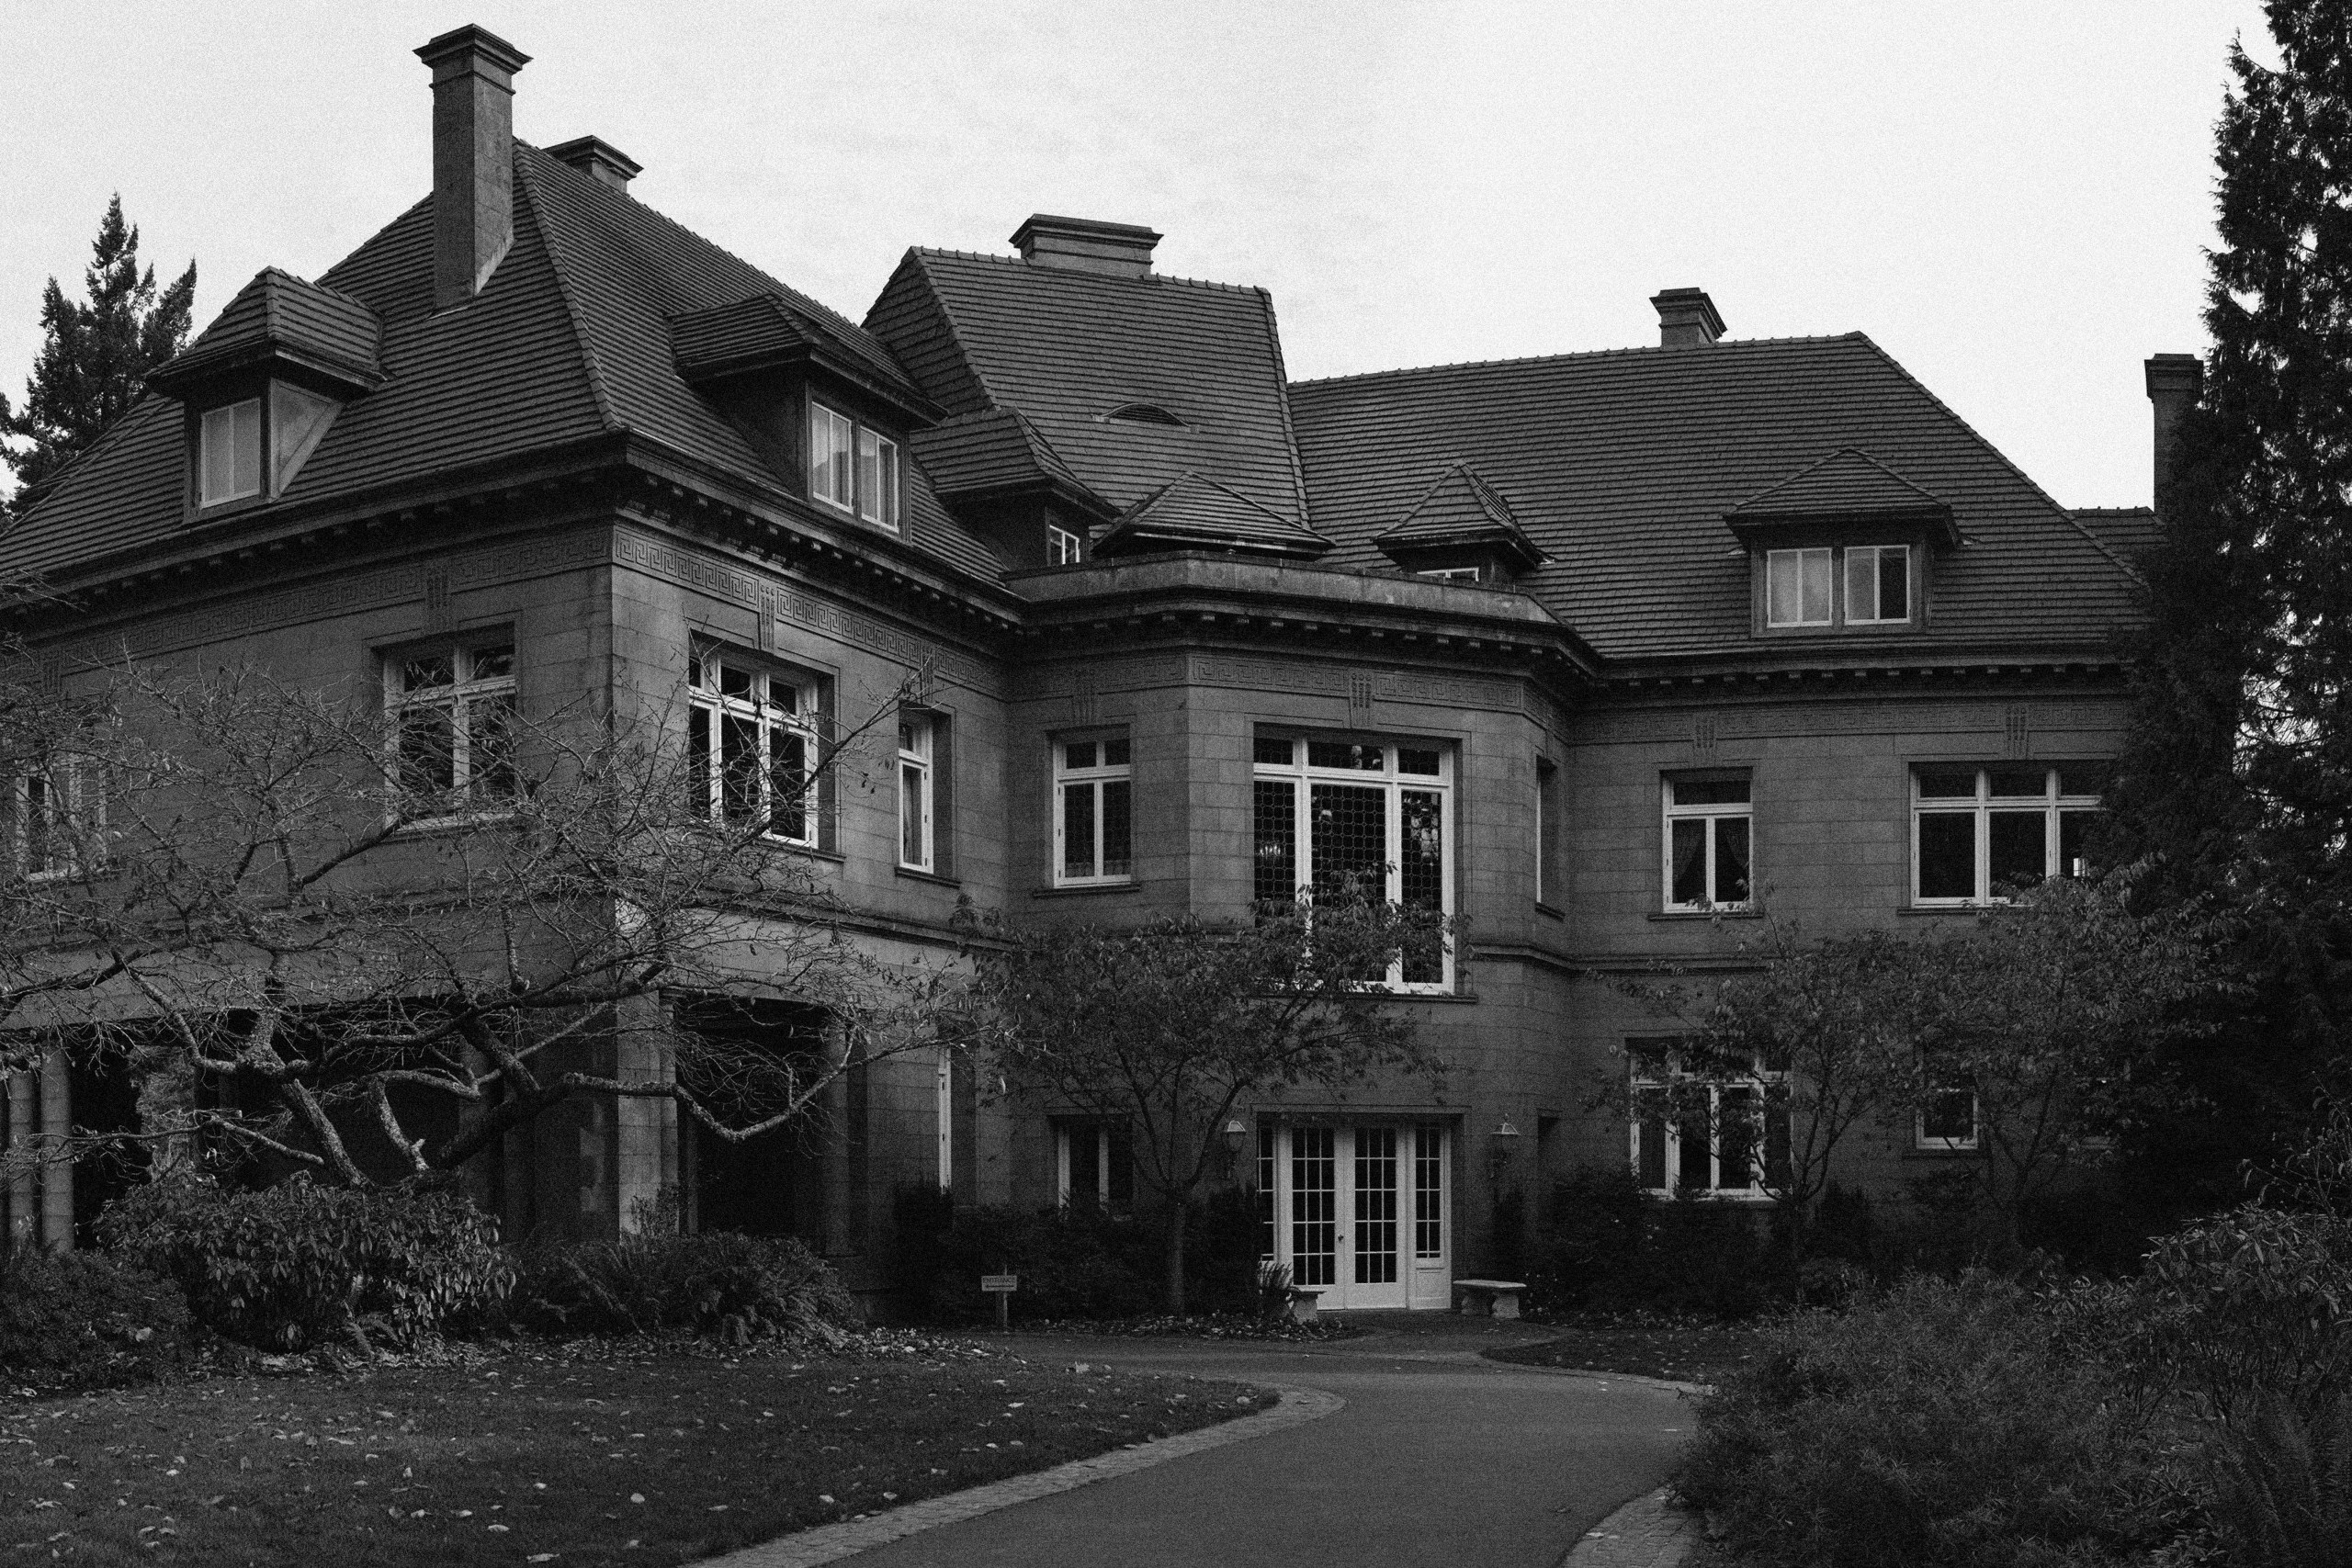 Pittock Mansion: America's Happiest Haunted House?